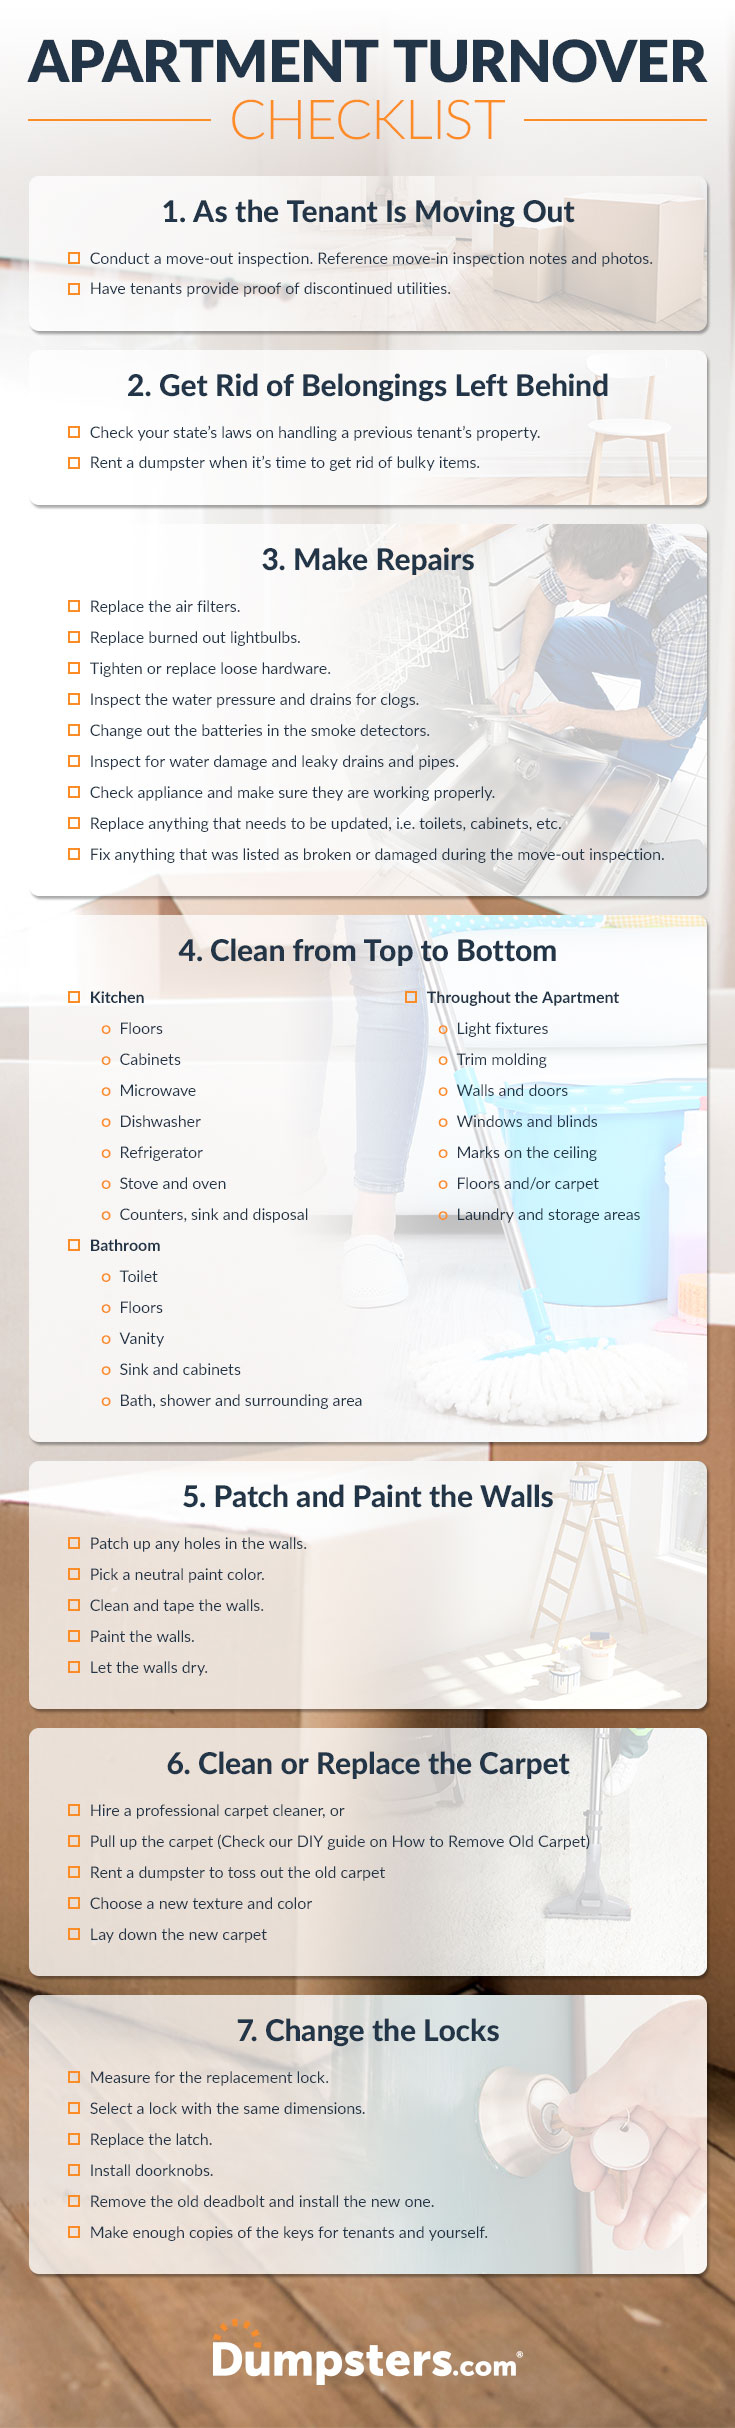 A Landlord Apartment Turnover Cleaning Checklist  Dumpsters For Apartment Turnover Checklist Template